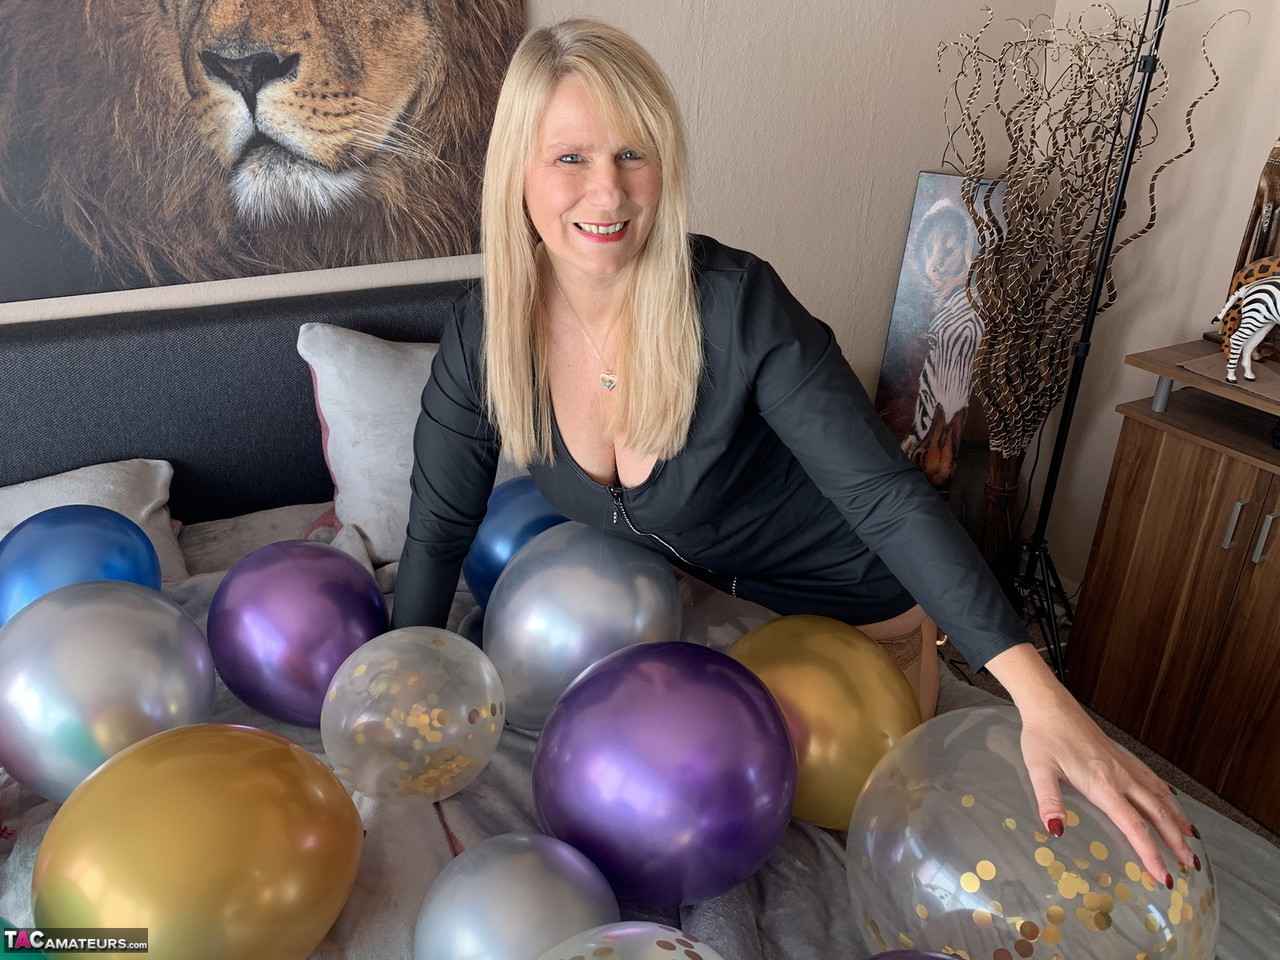 https://www.pornpics.com/de/galleries/middleaged-blonde-sweet-susi-gets-naked-on-her-bed-amid-balloons-48580477/